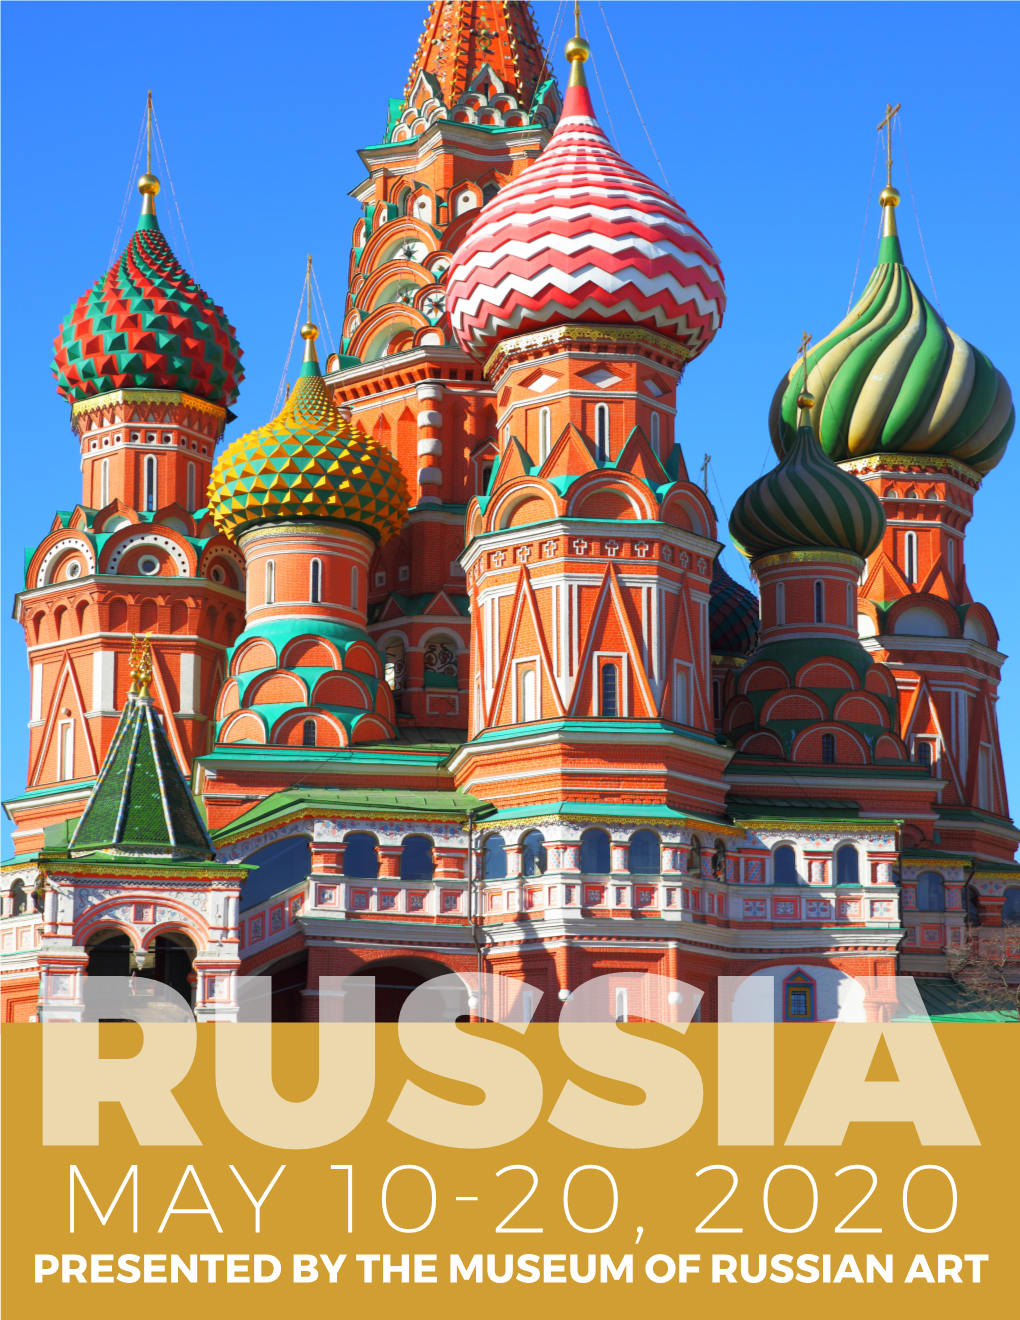 MAY 10-20, 2020 PRESENTED by the MUSEUM of RUSSIAN ART Experience Russia’S Artistic Achievements, Historic Treasures, and Rich Culture with Mark J